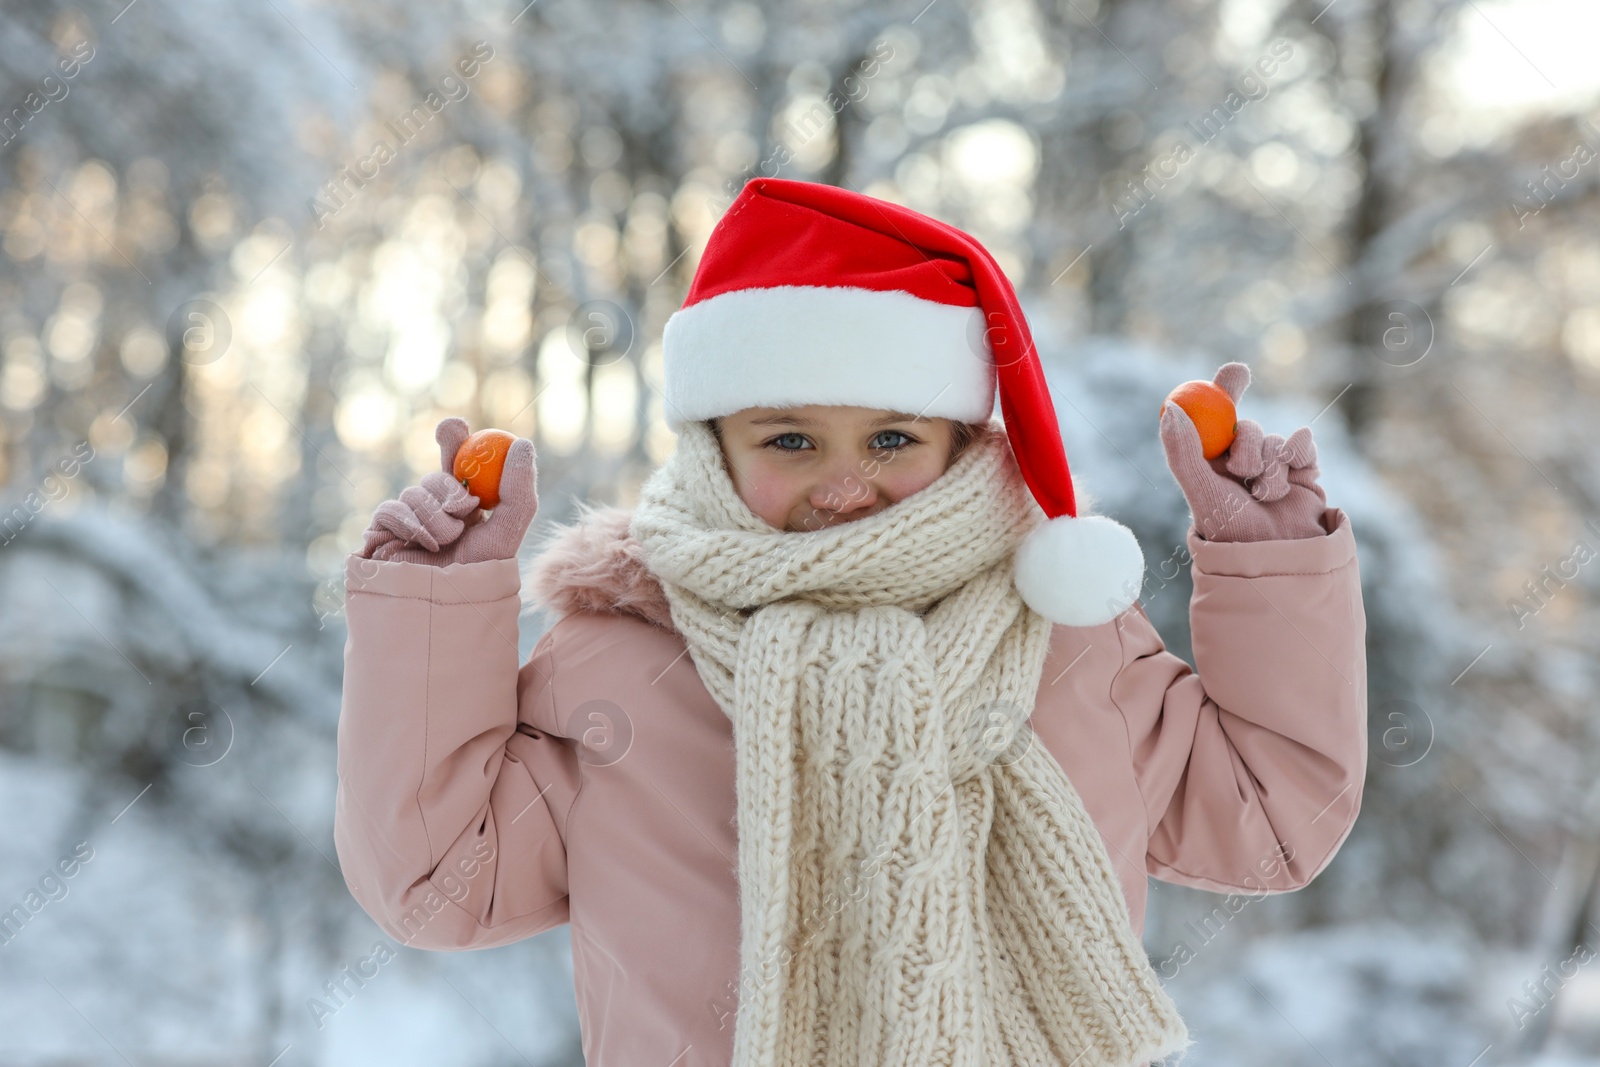 Photo of Cute little girl with tangerines wearing Santa hat in snowy park on winter day